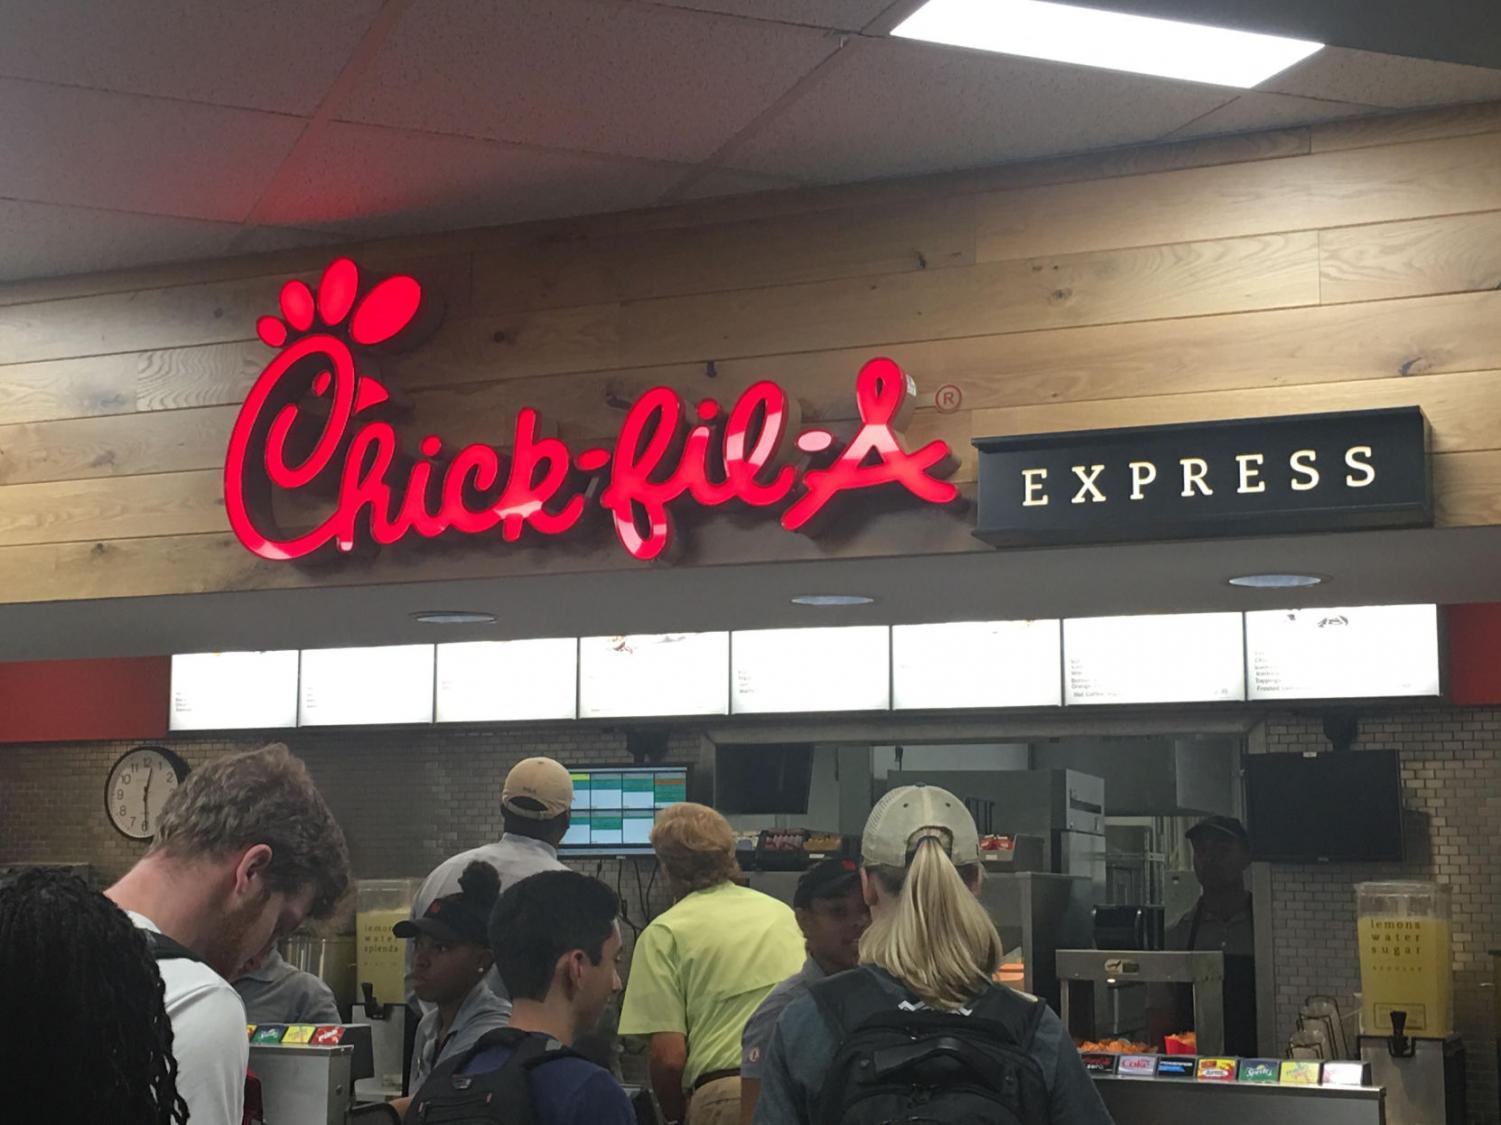 Chick-Fil-A+in+Russell+Union+now+Chick-Fil-A+Express%2C+Starbucks+expanded